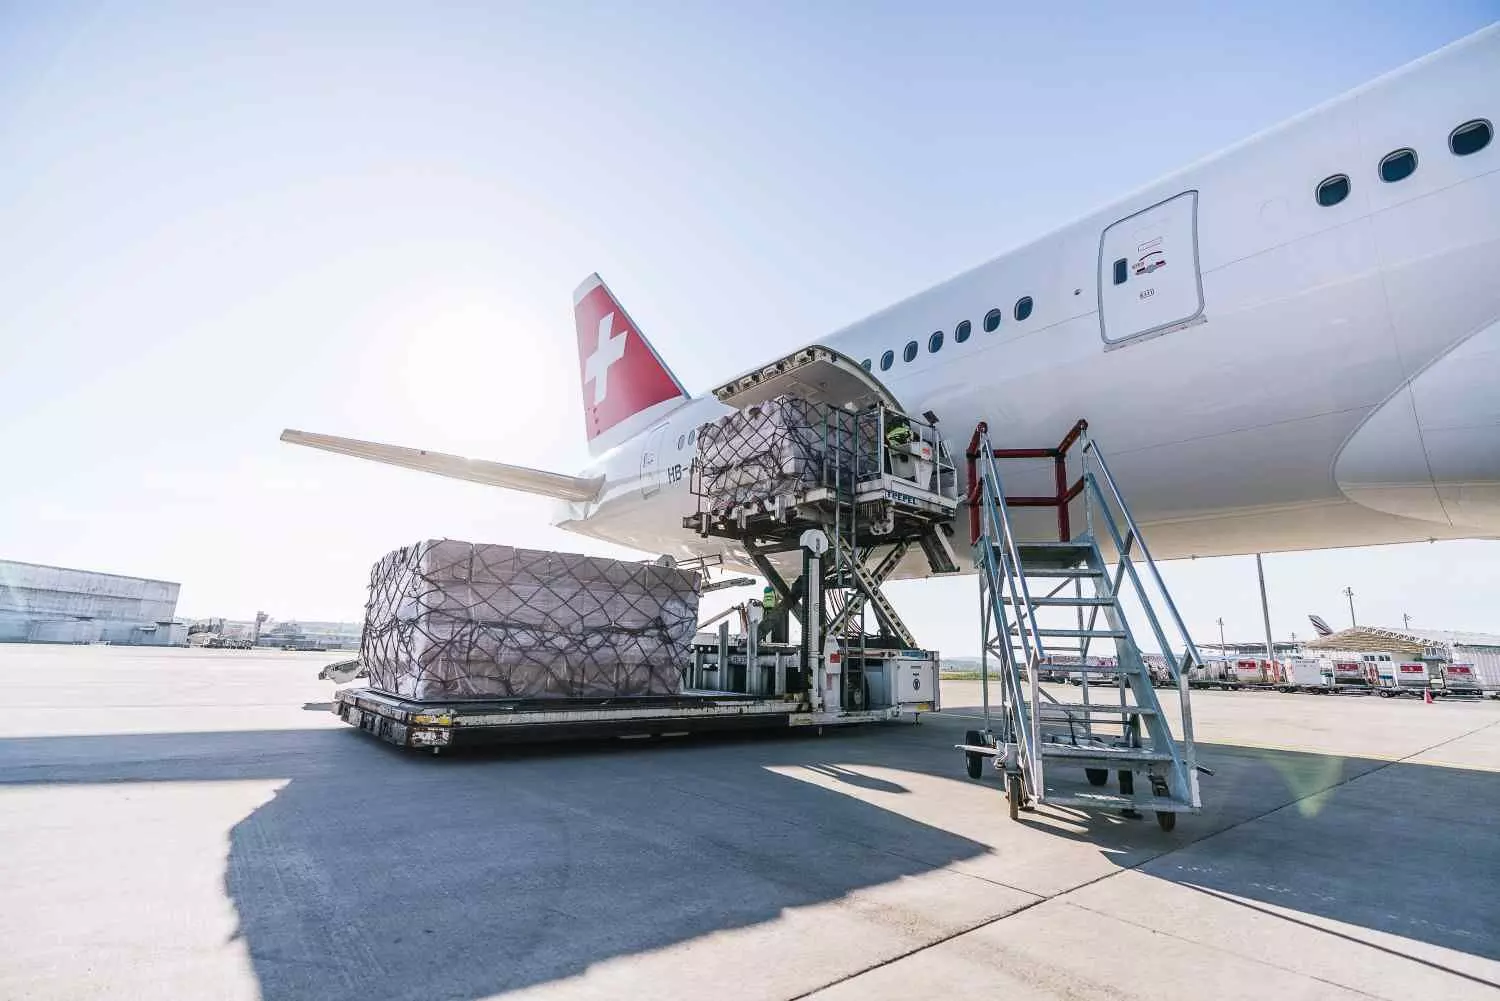 Swiss WorldCargo’s new product structure unveiled